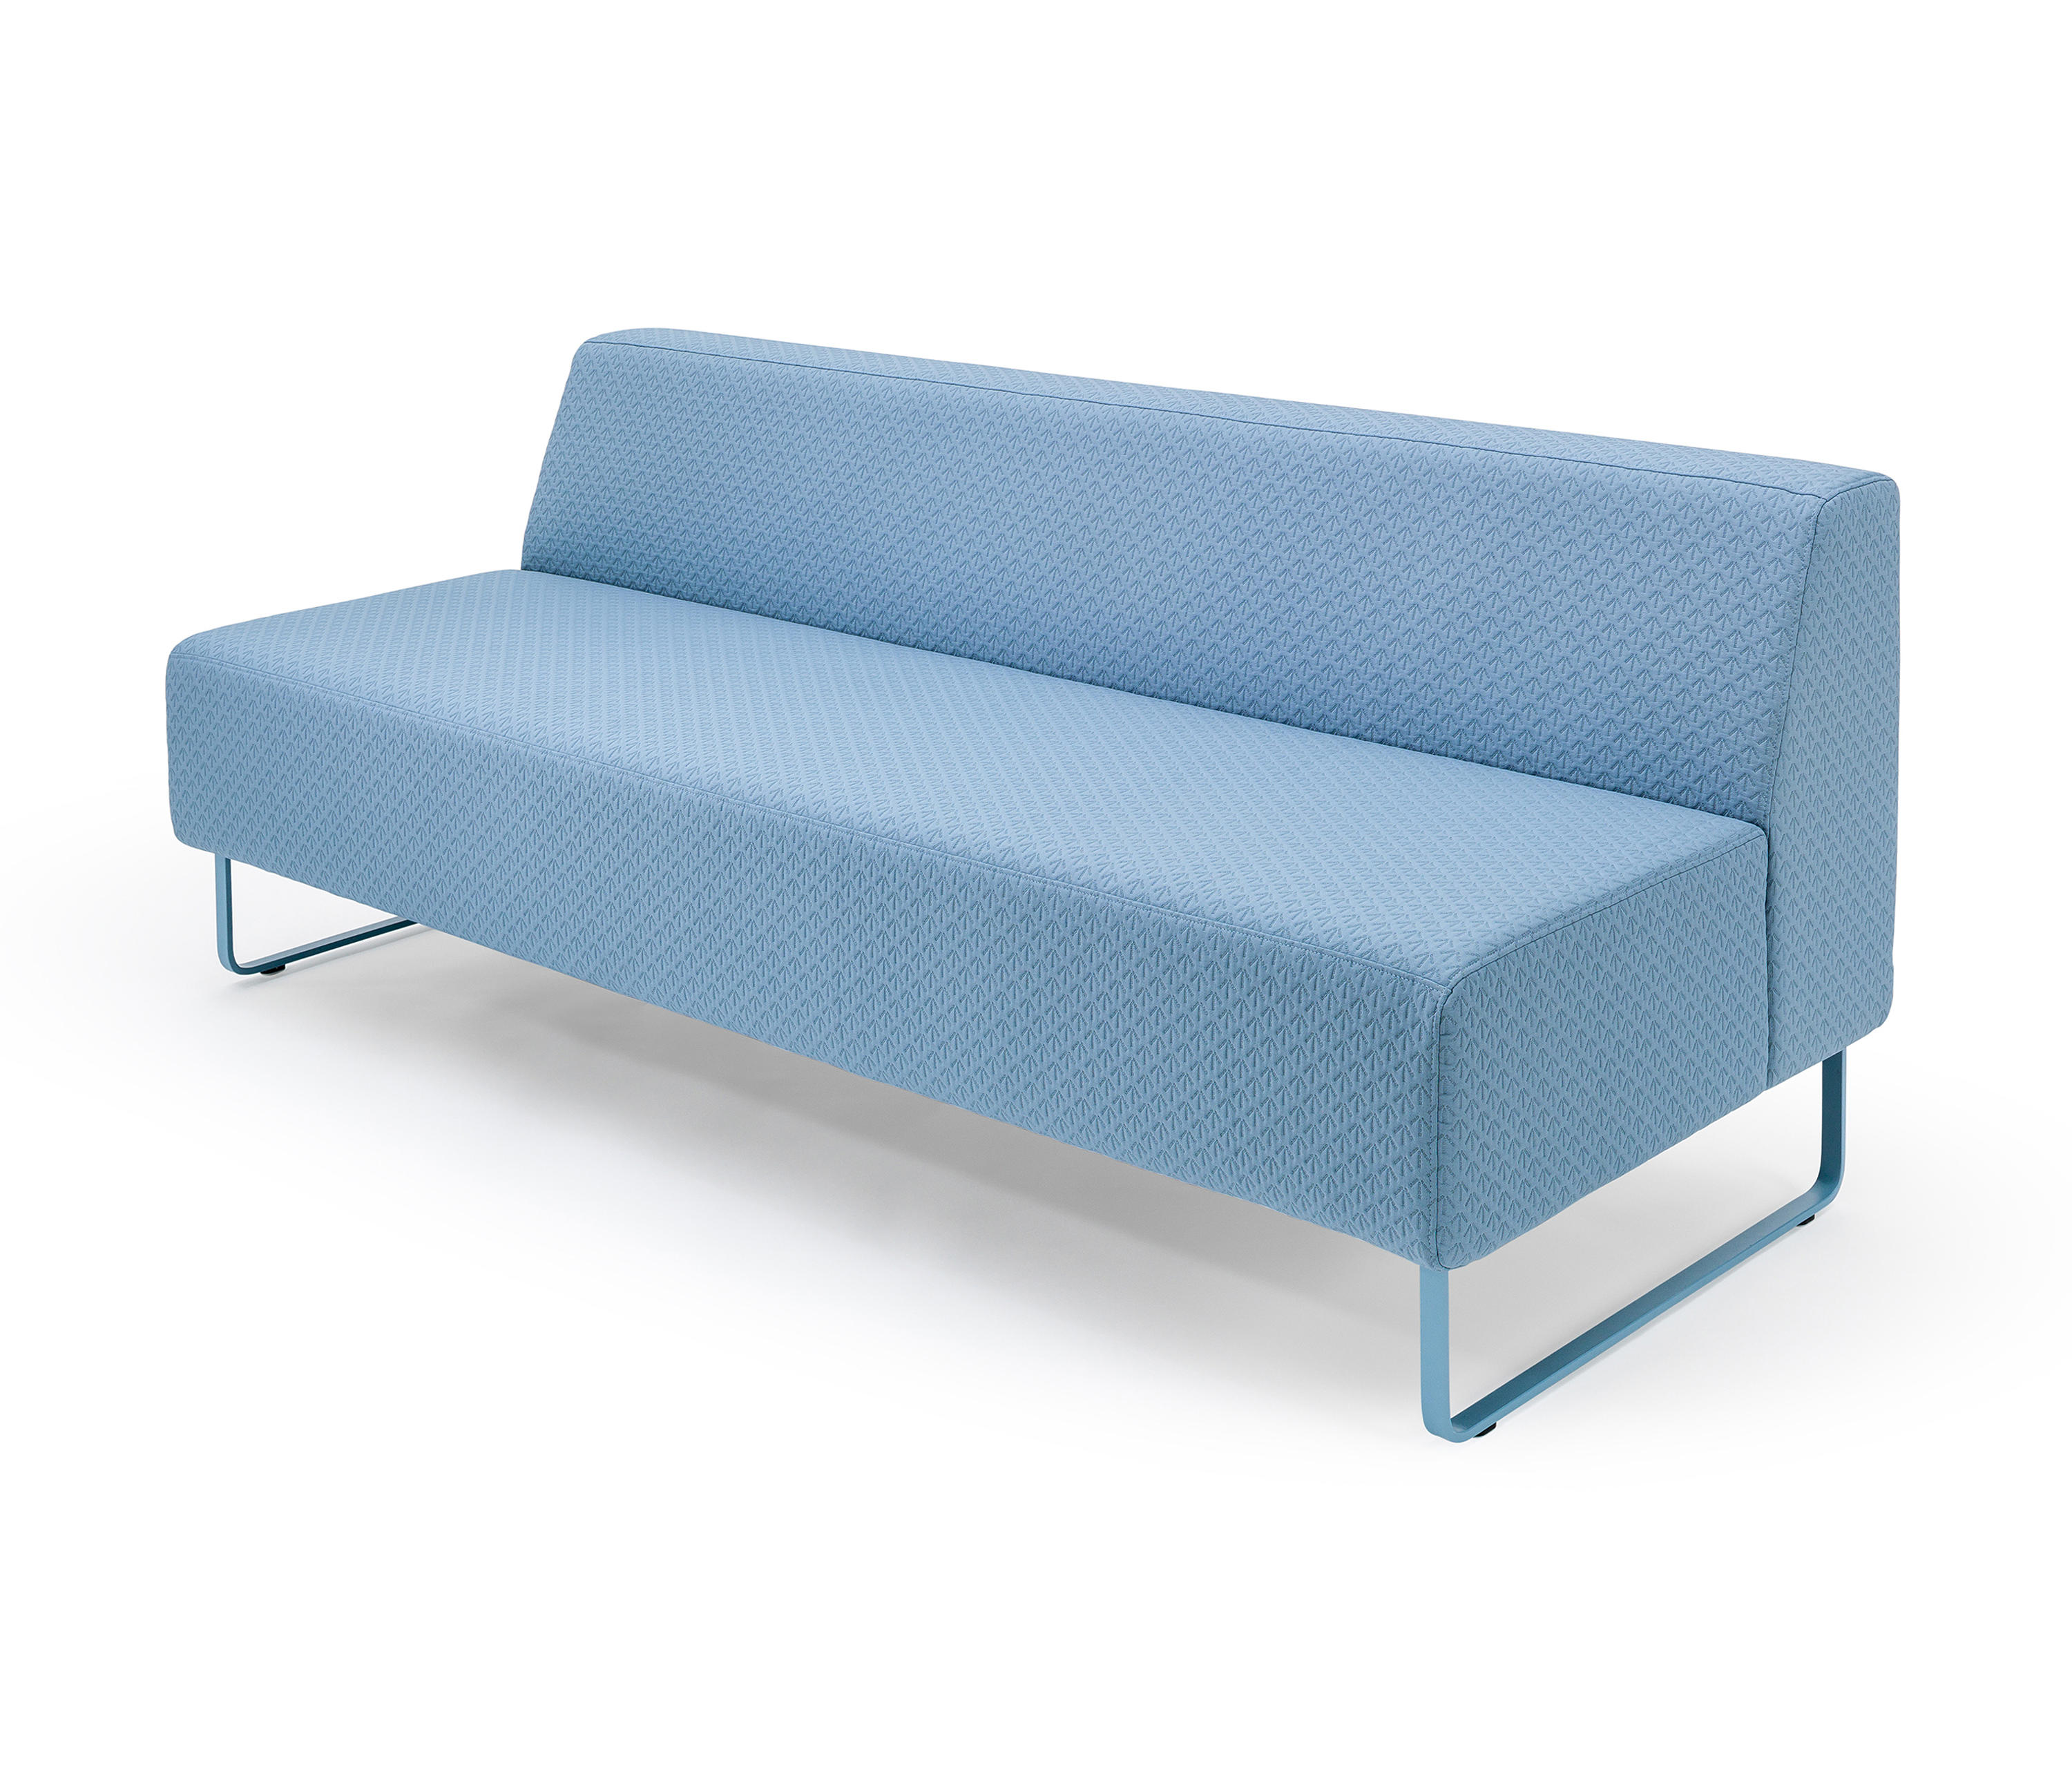 Riverbend Sofas From Haworth Architonic